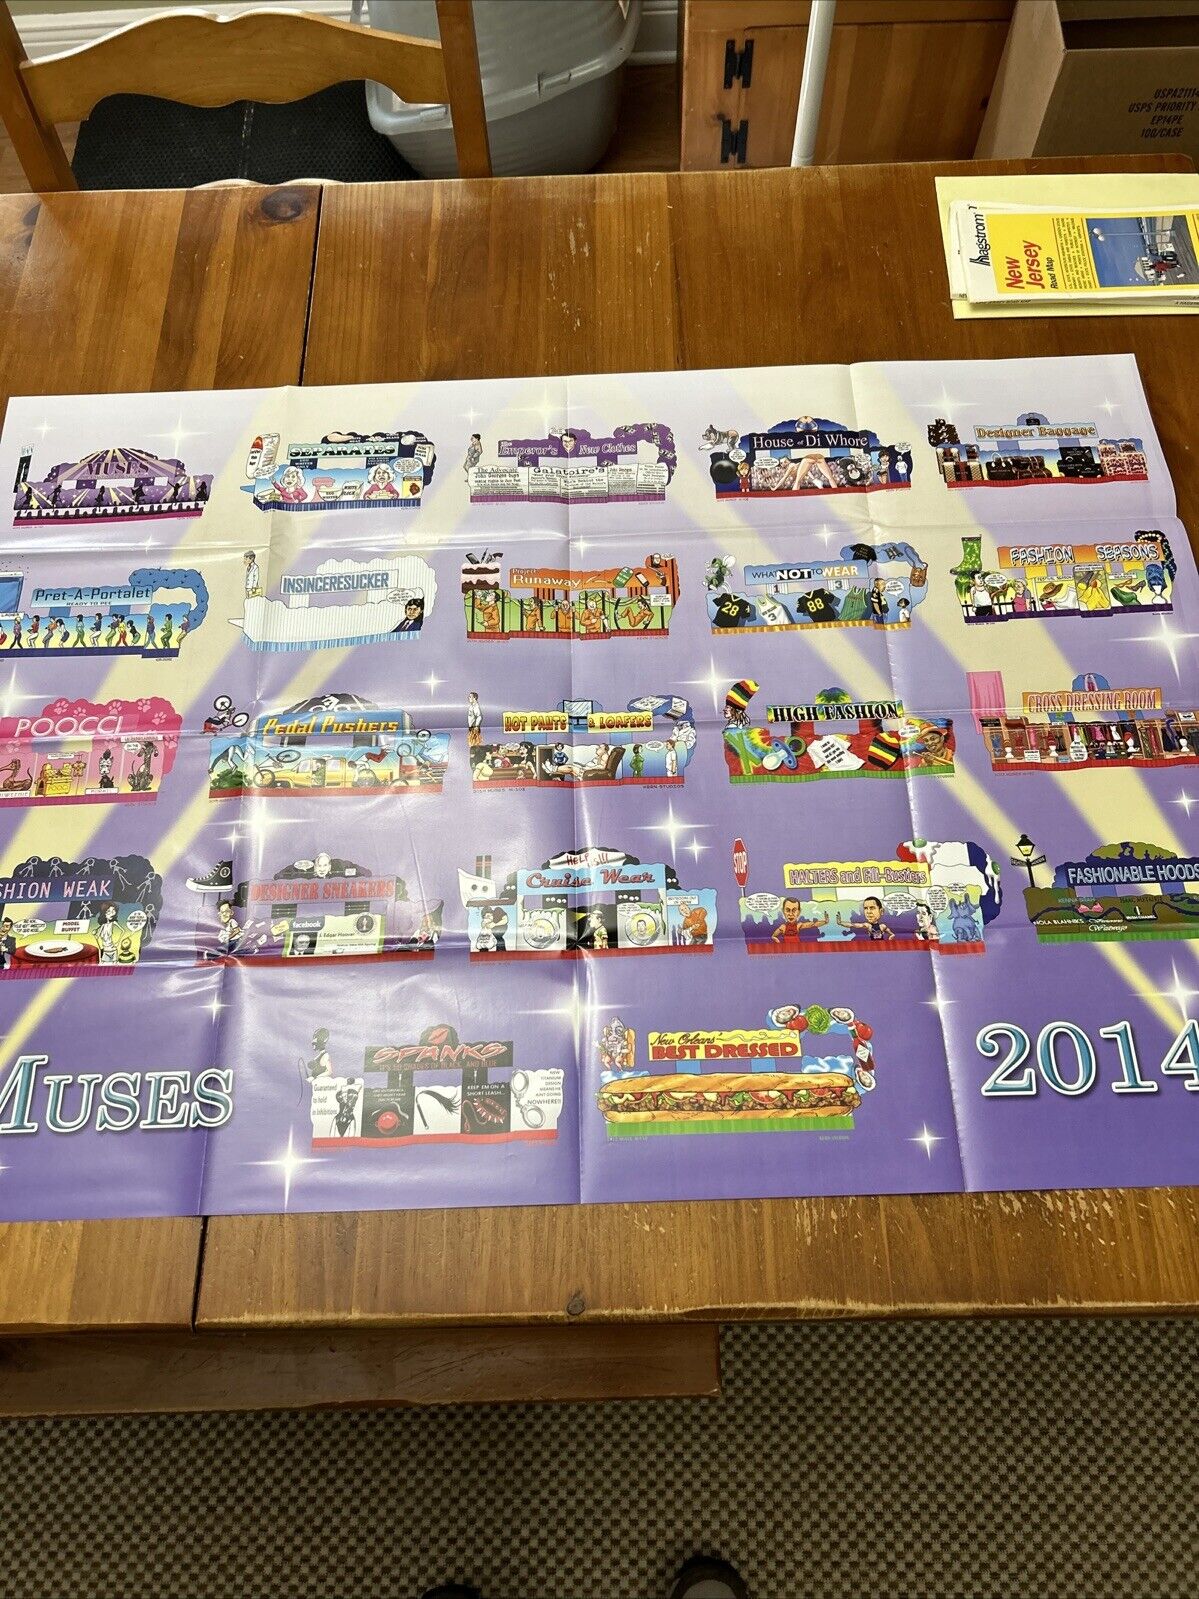 Krewe of Muses 2014 Poster 38 x 27 inches 